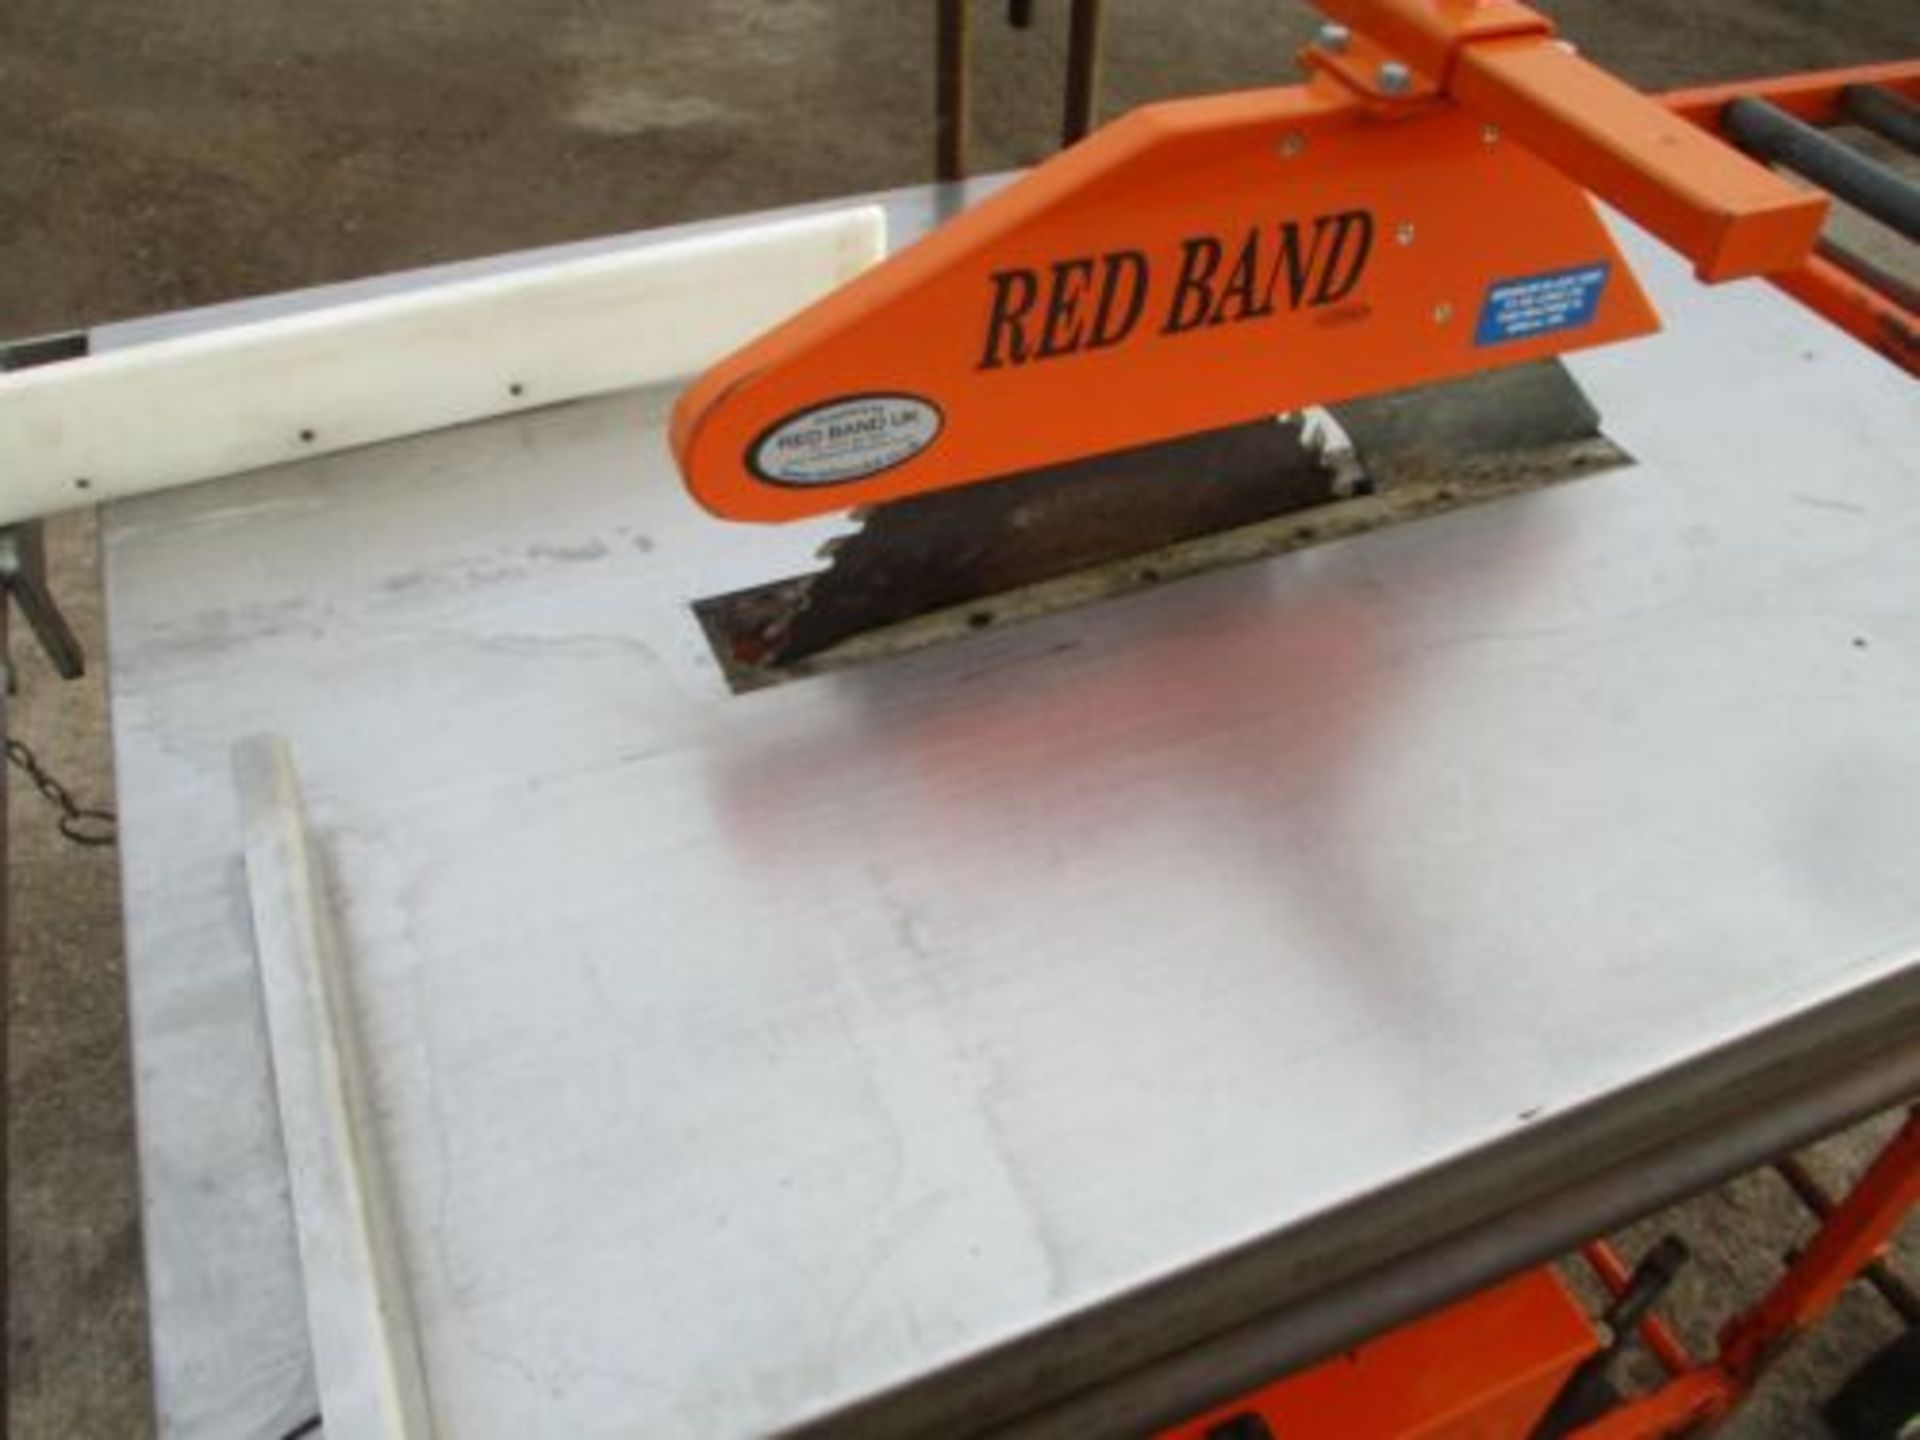 HONDA DIESEL POWER: RED BAND WSA400 SAW - Image 5 of 6